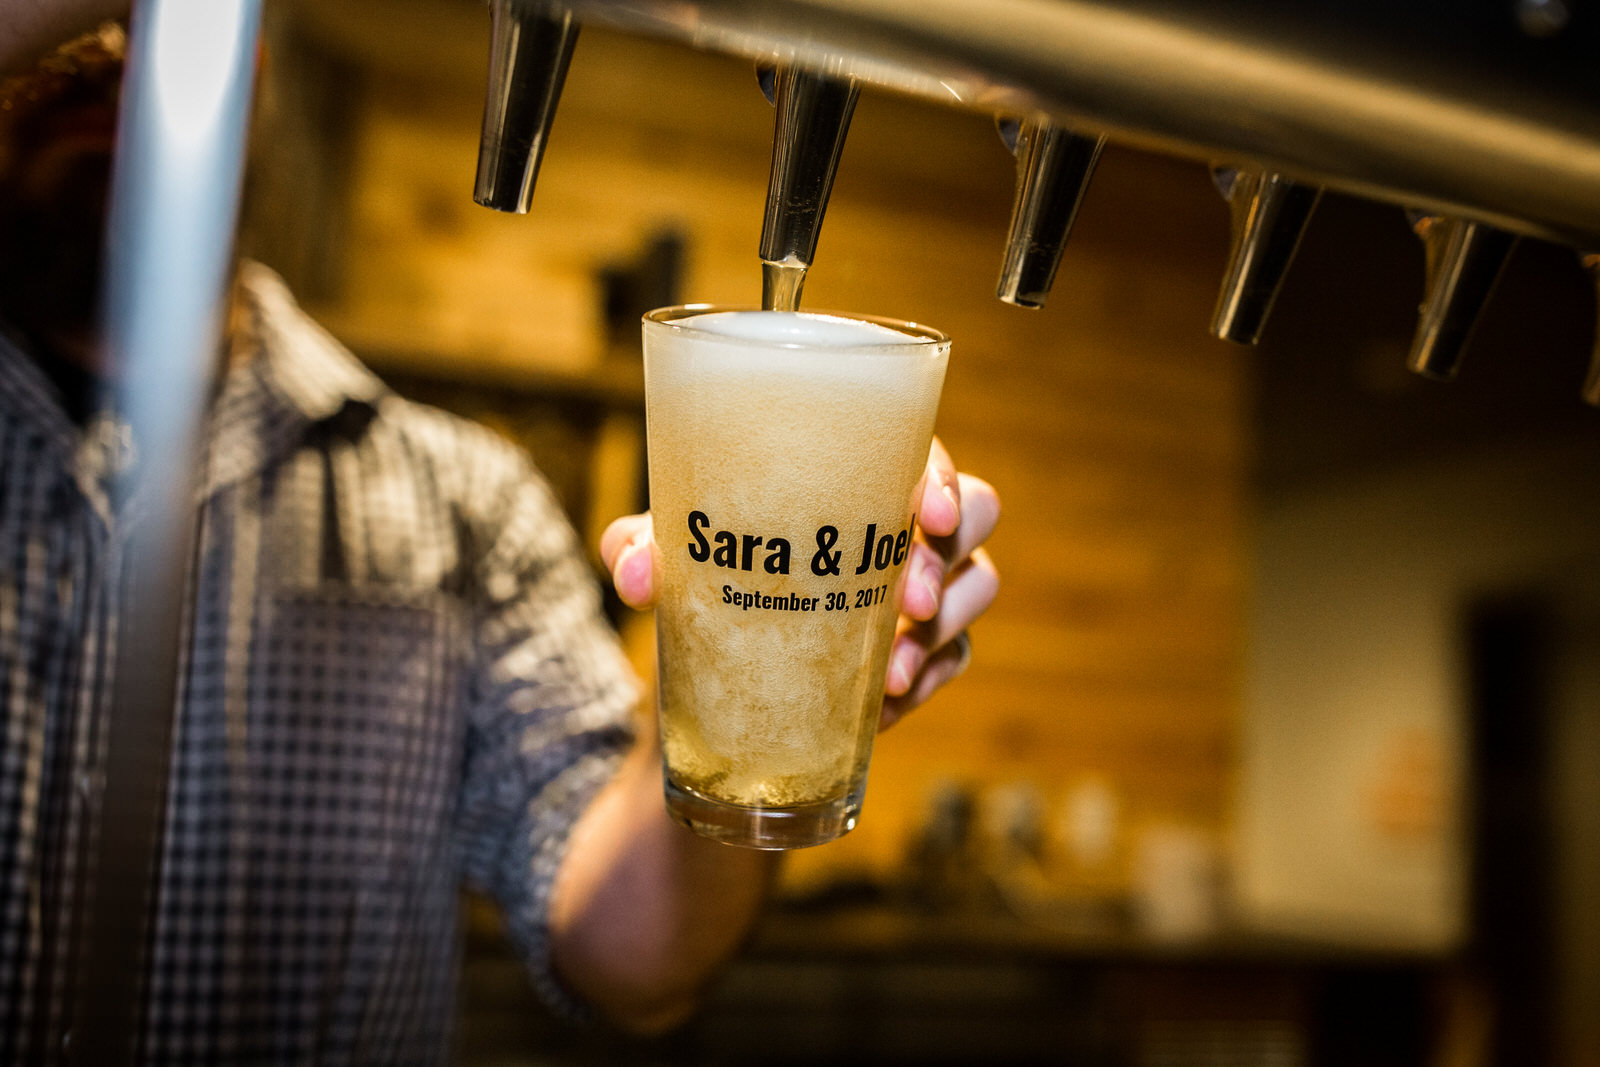 Getting Married at Surly? Beer pour